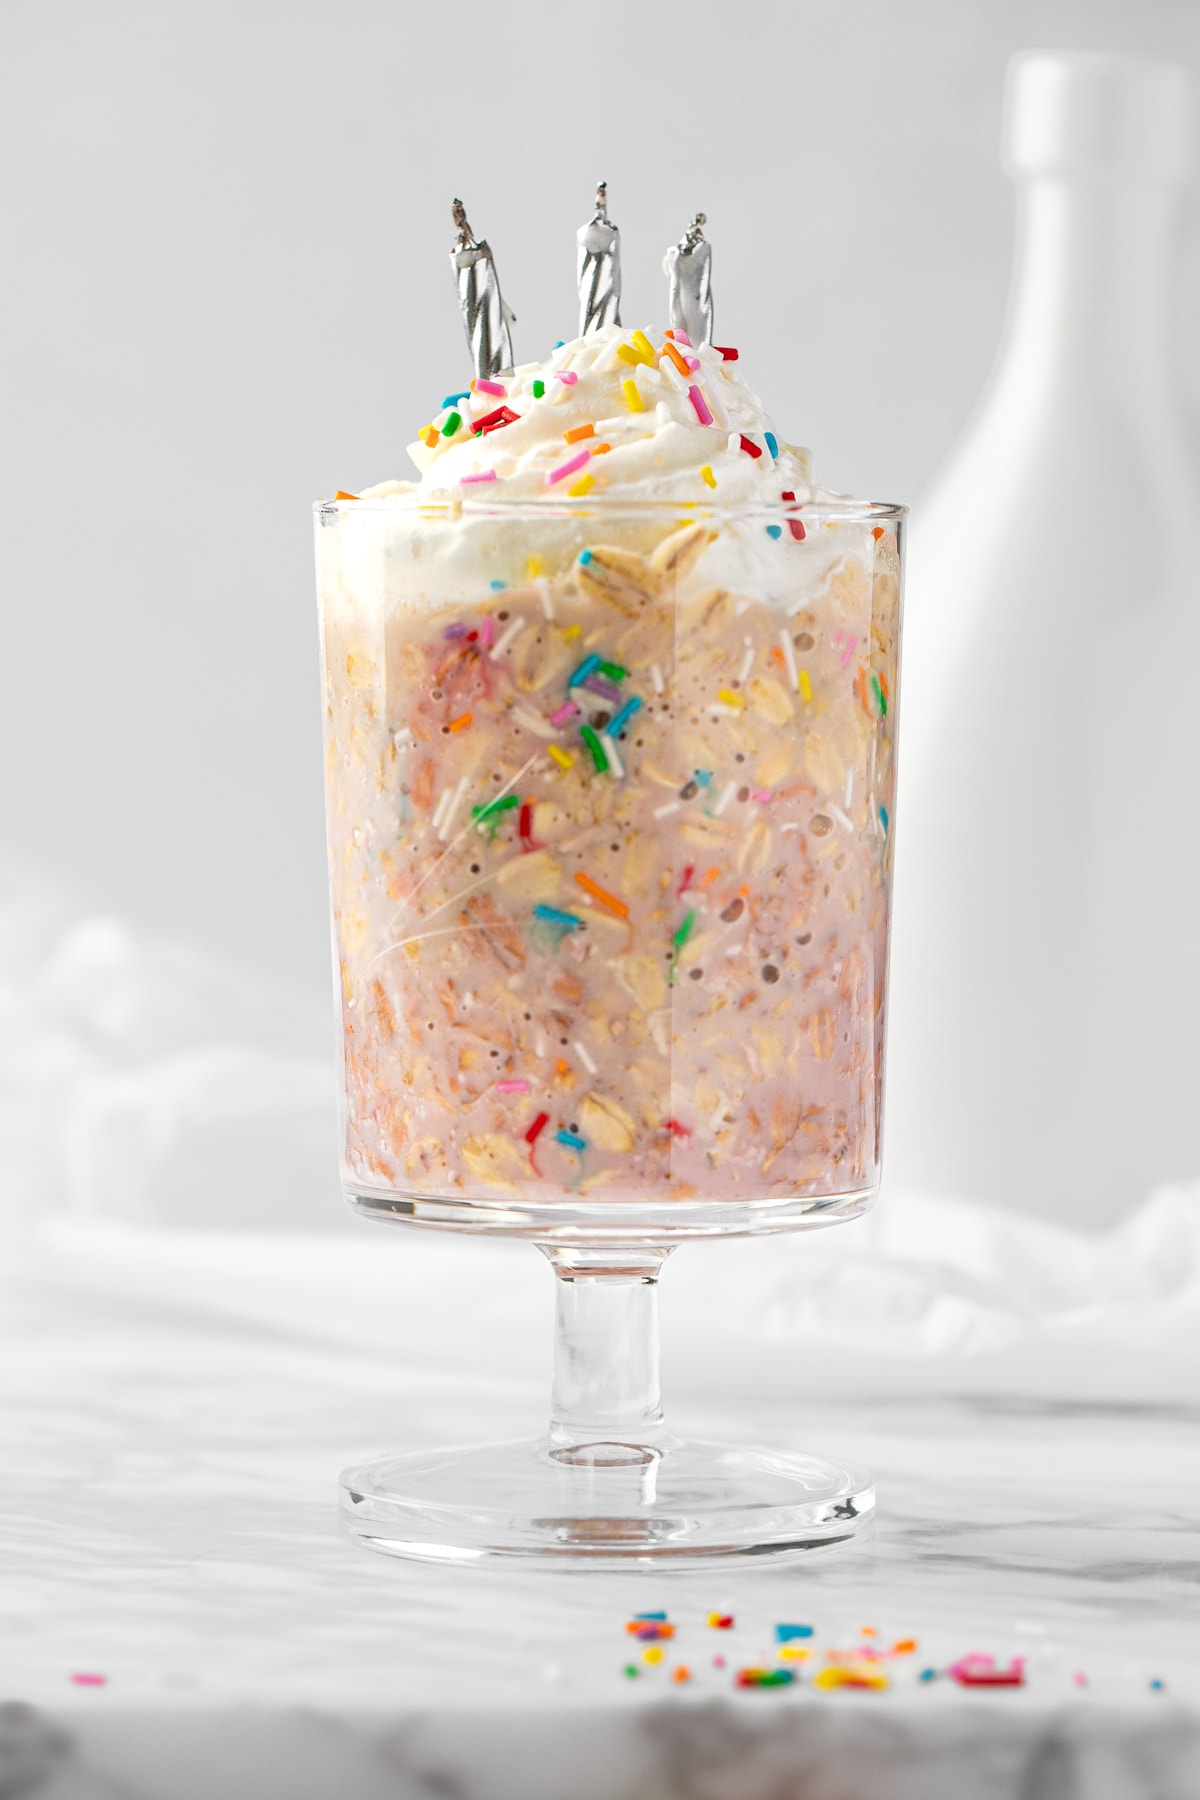 Eye level view of birthday cake overnight oats, topped with whipped cream and sprinkles, on a white background.